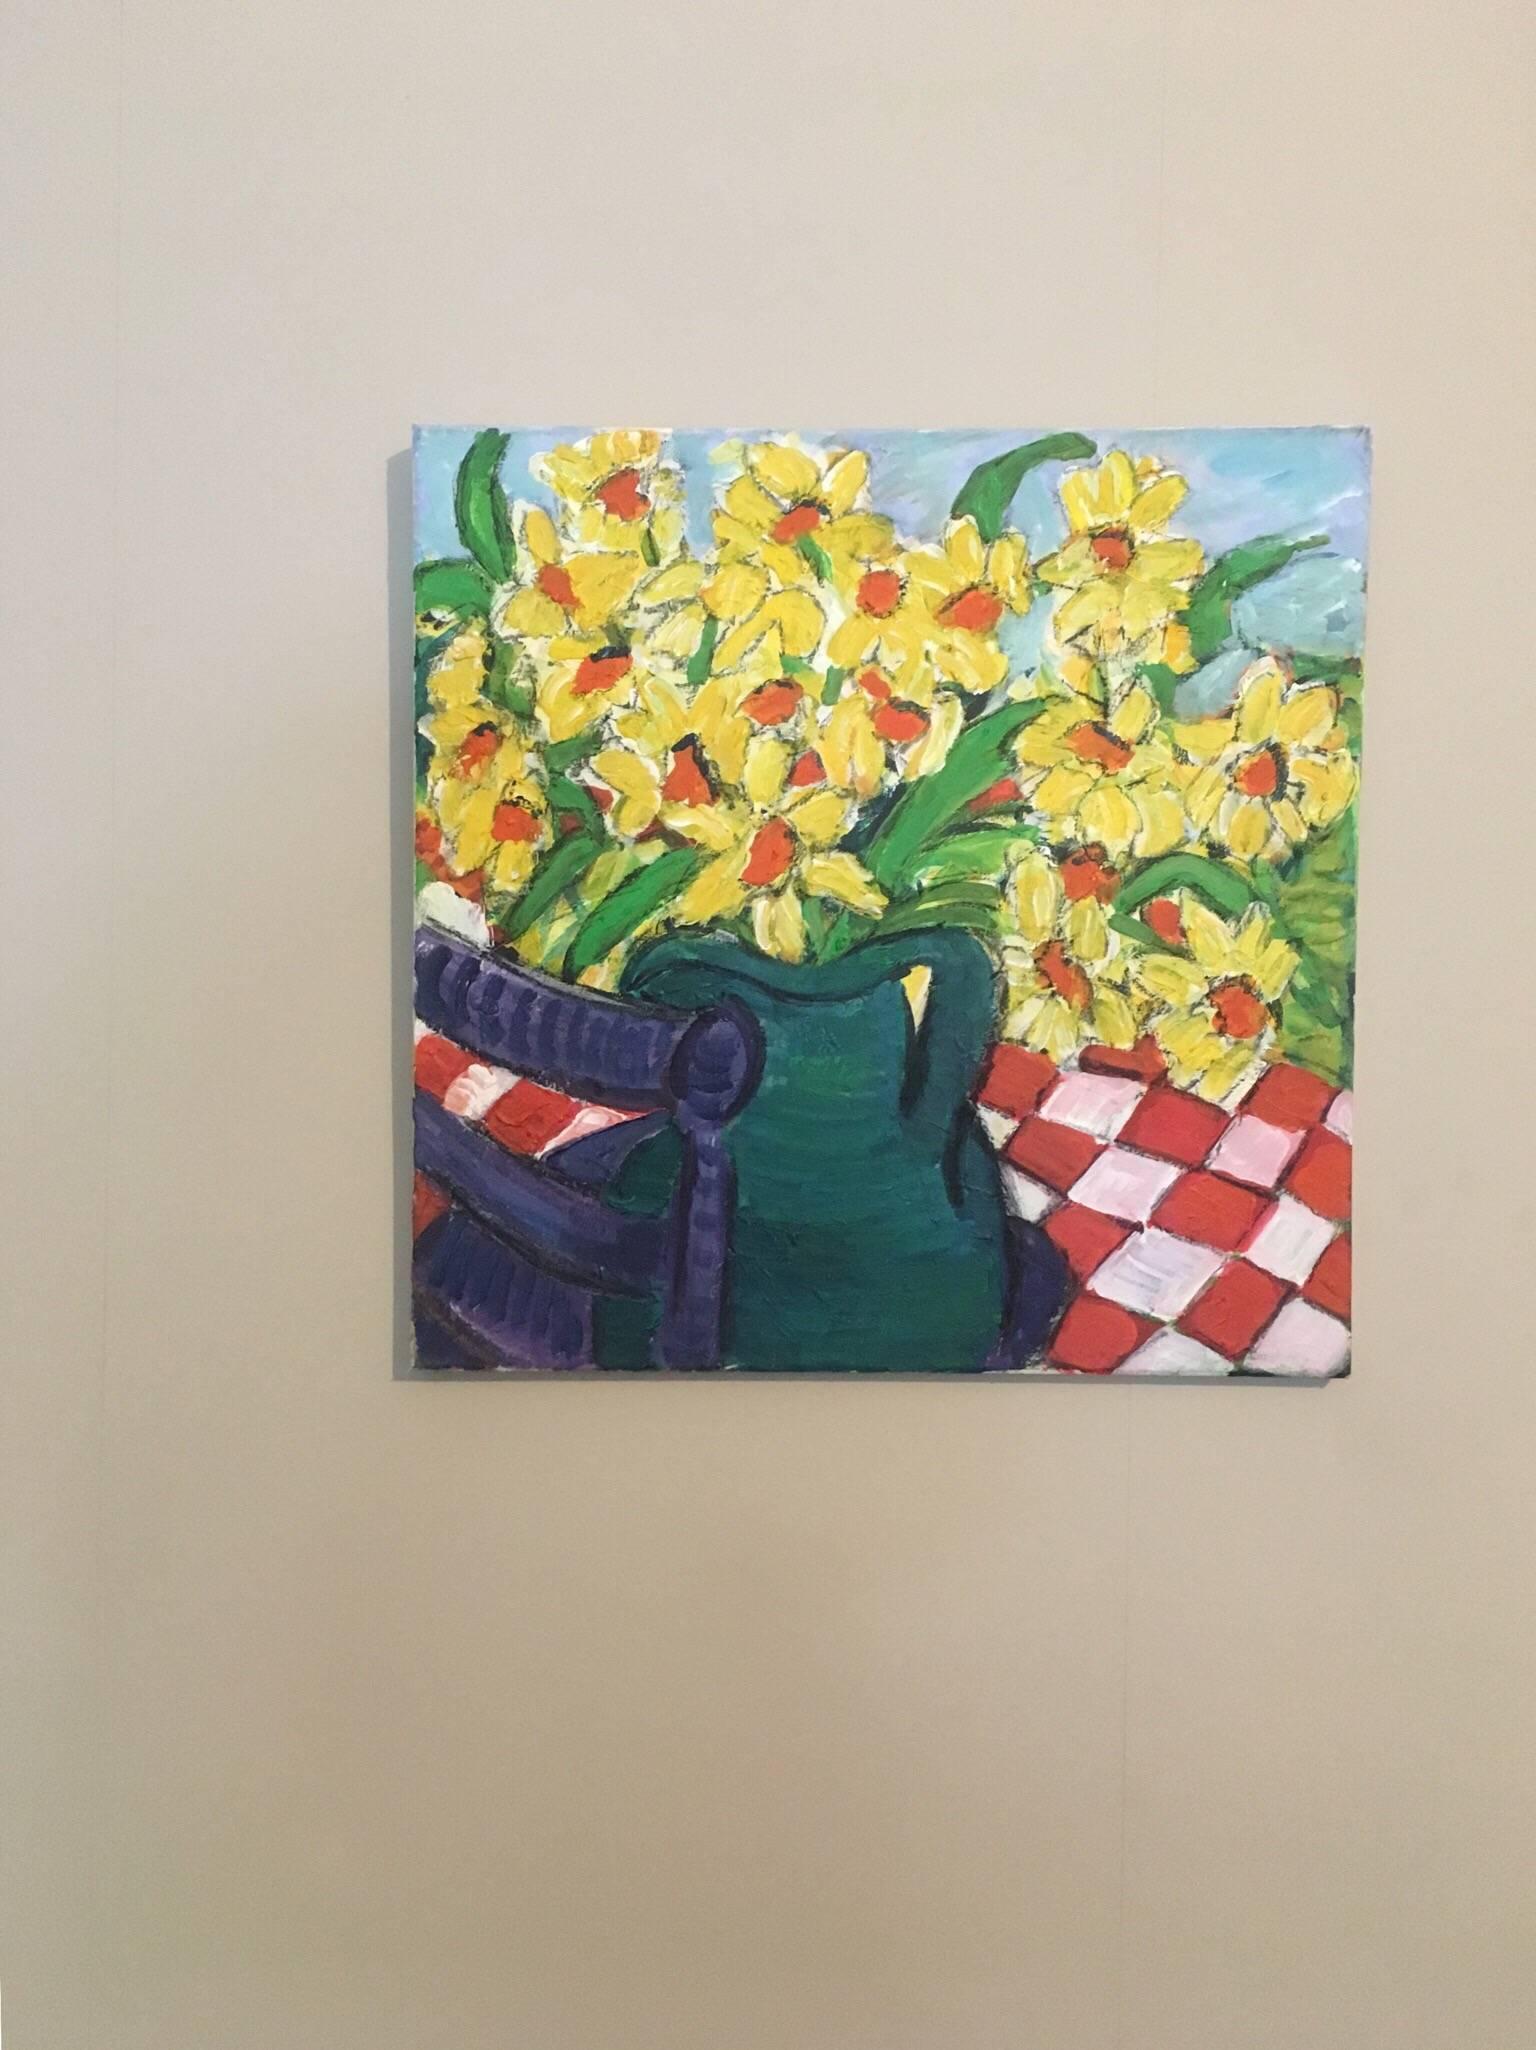 Daffodils in a Green Vase, Flower Oil Painting, British Artist
by Pamela Cawley, British 20th century
oil painting on canvas, unframed

canvas: 20 x 20 inches 

Stunning original Impressionist oil painting by the 20th century British artist, Pamela